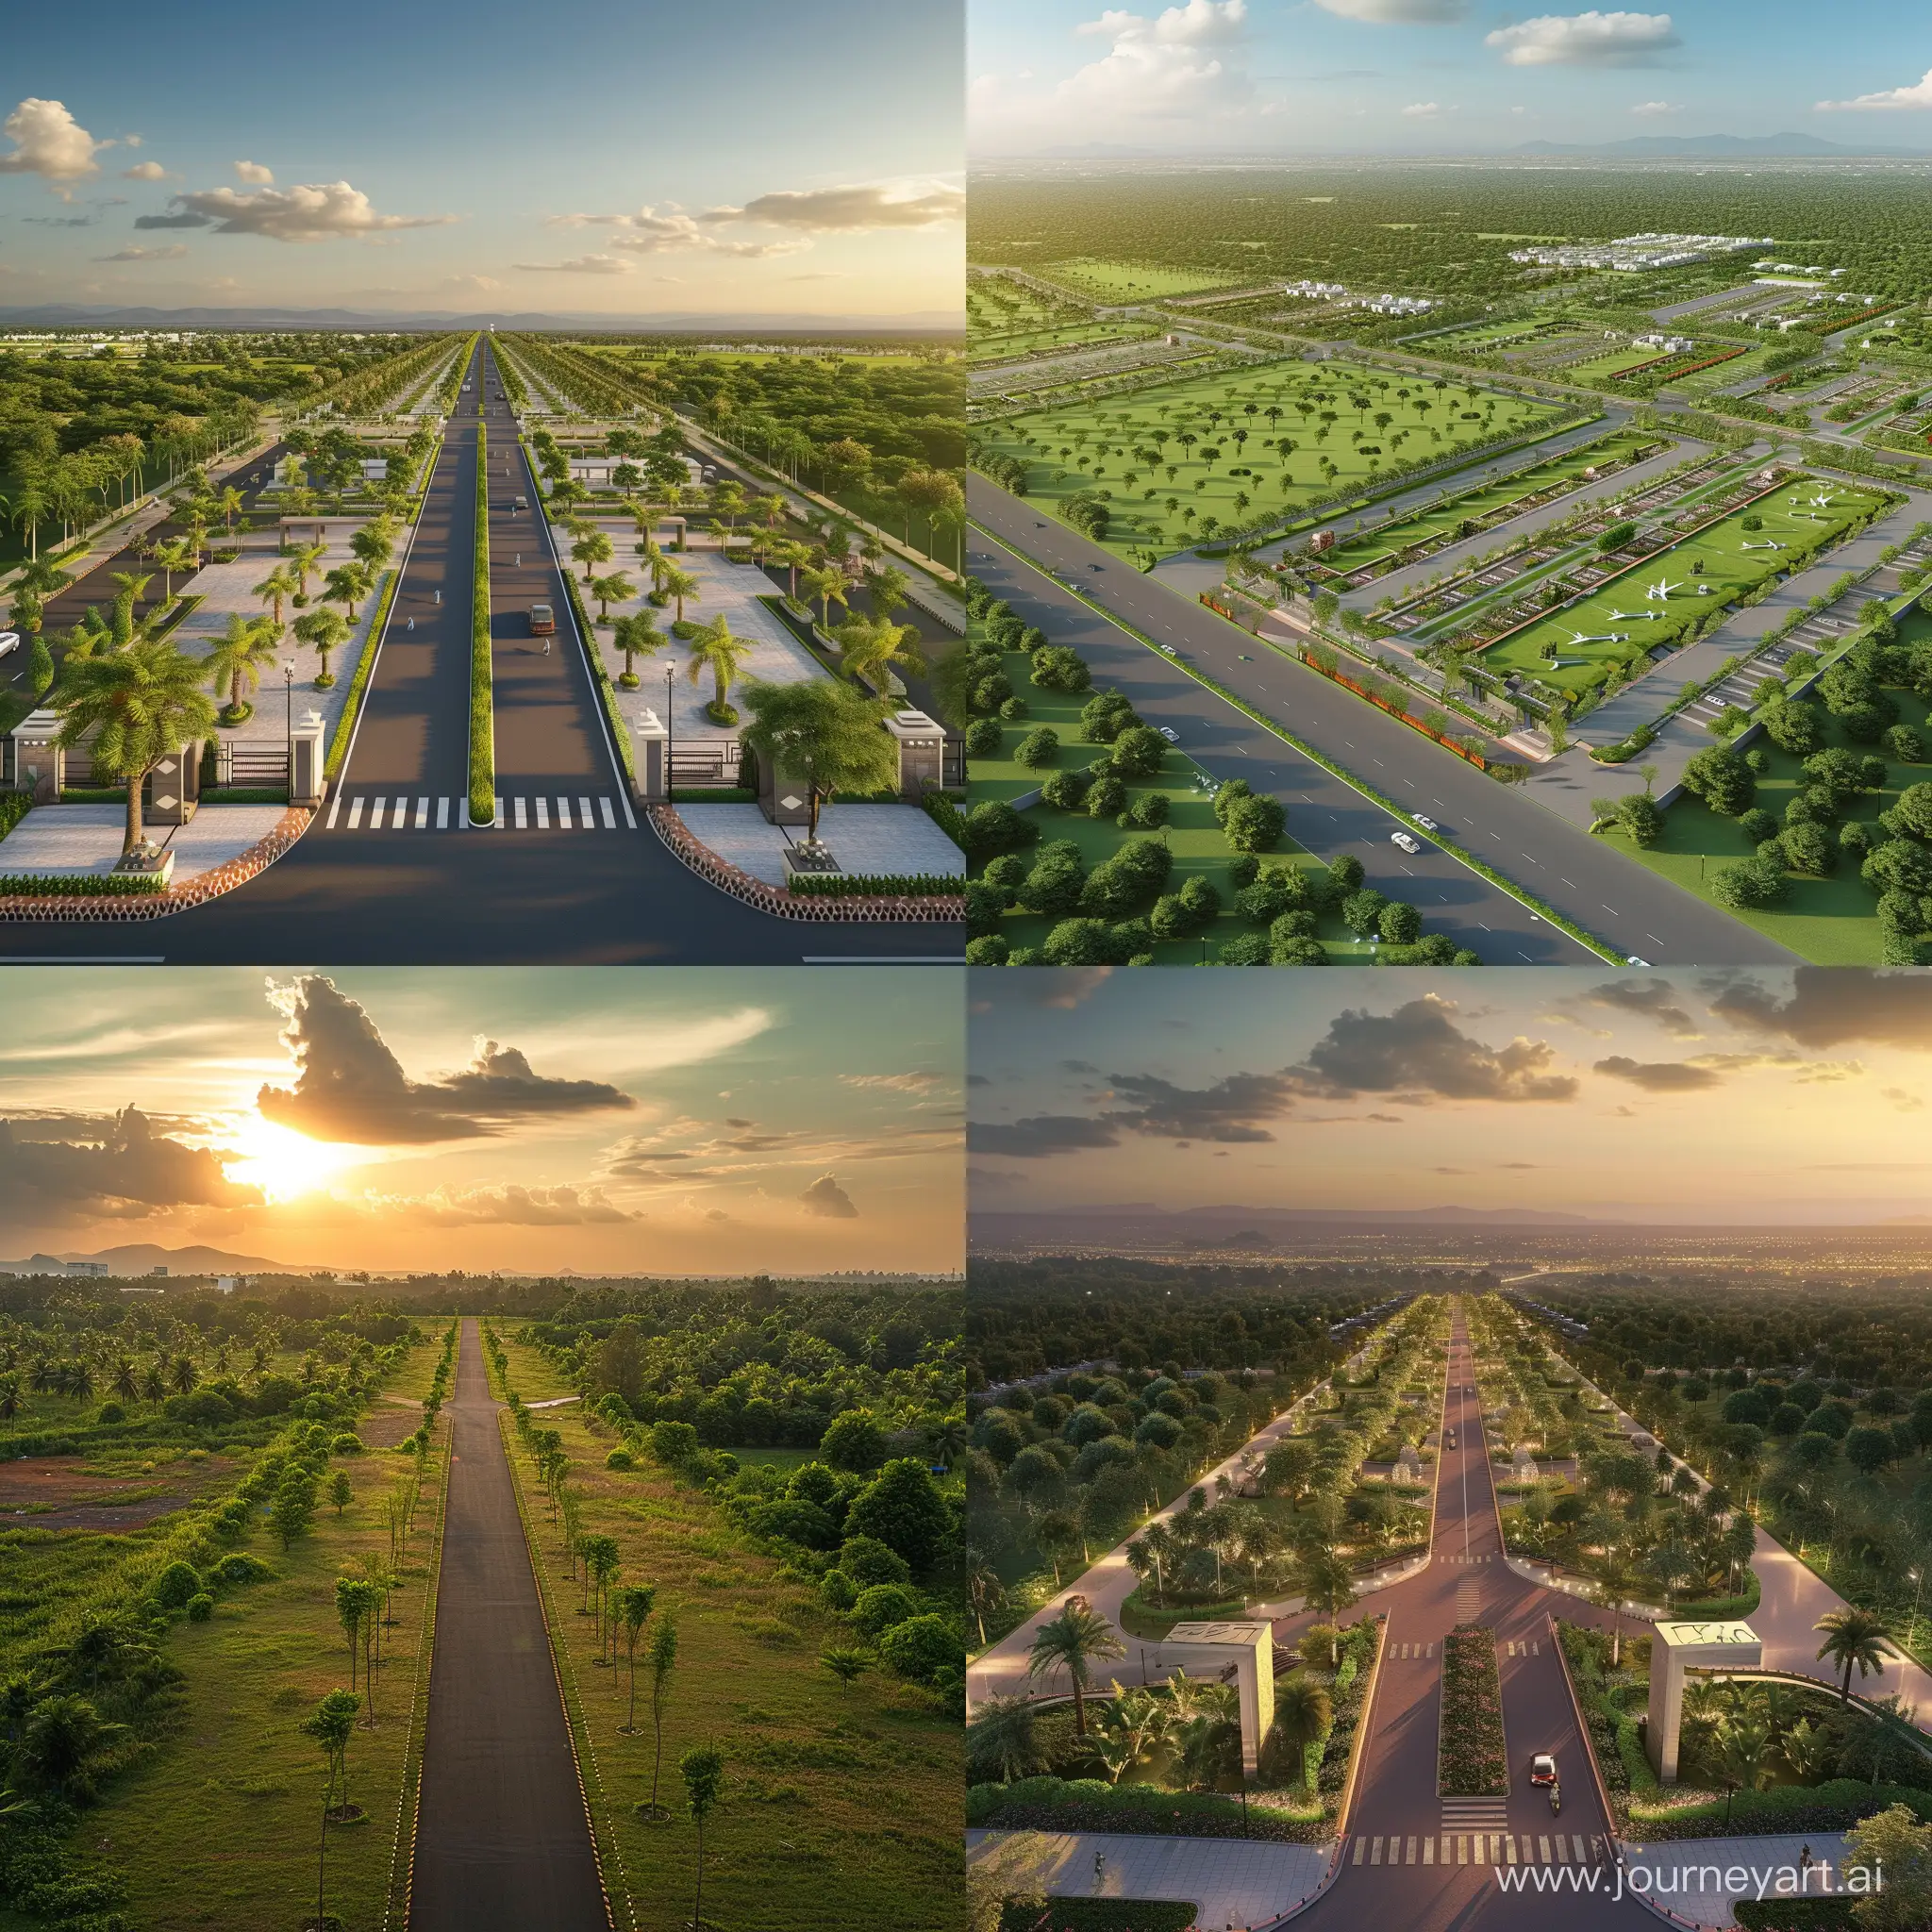 Prime-Investment-Opportunity-Versatile-Residential-and-Commercial-Plot-in-India-10-Minutes-from-Key-Transportation-Hubs